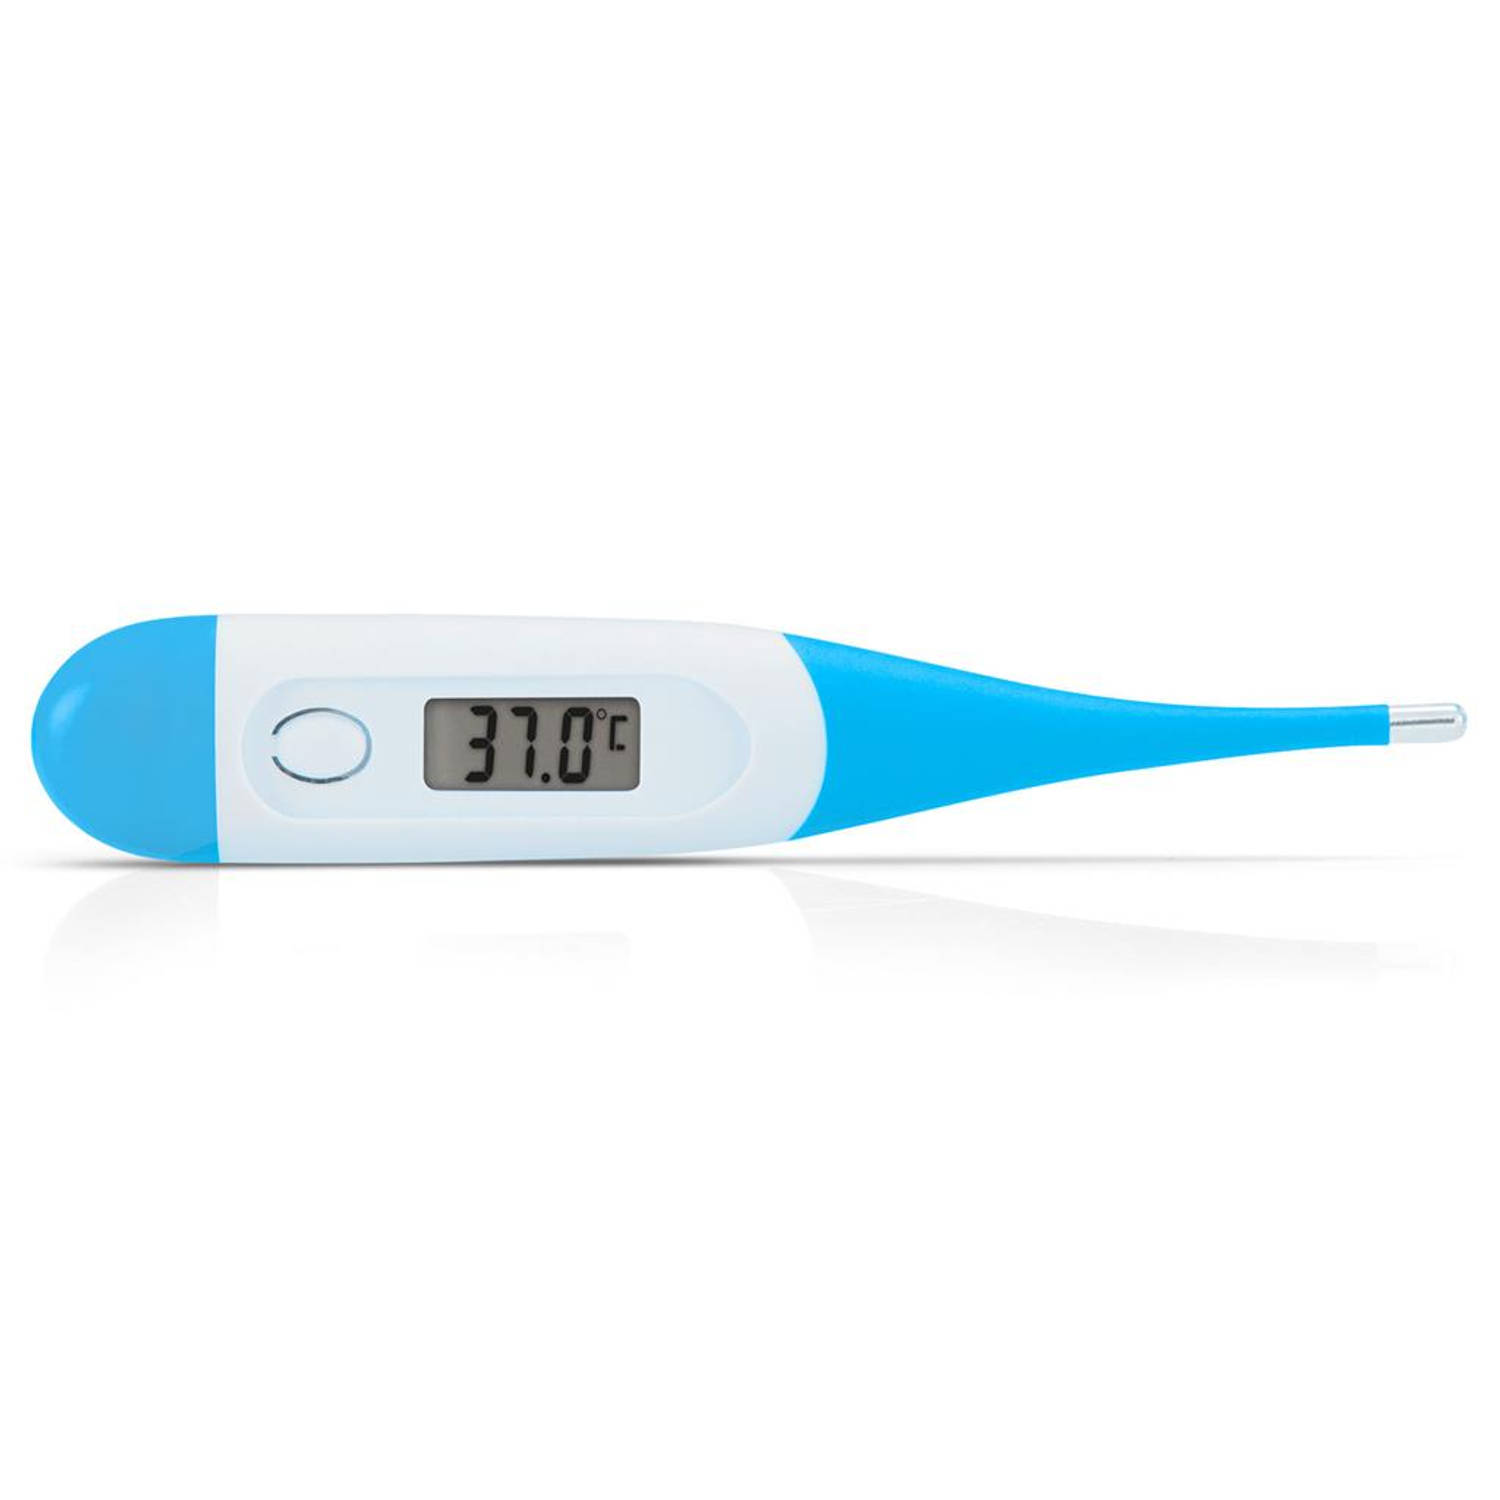 Alecto thermometer - | Blokker